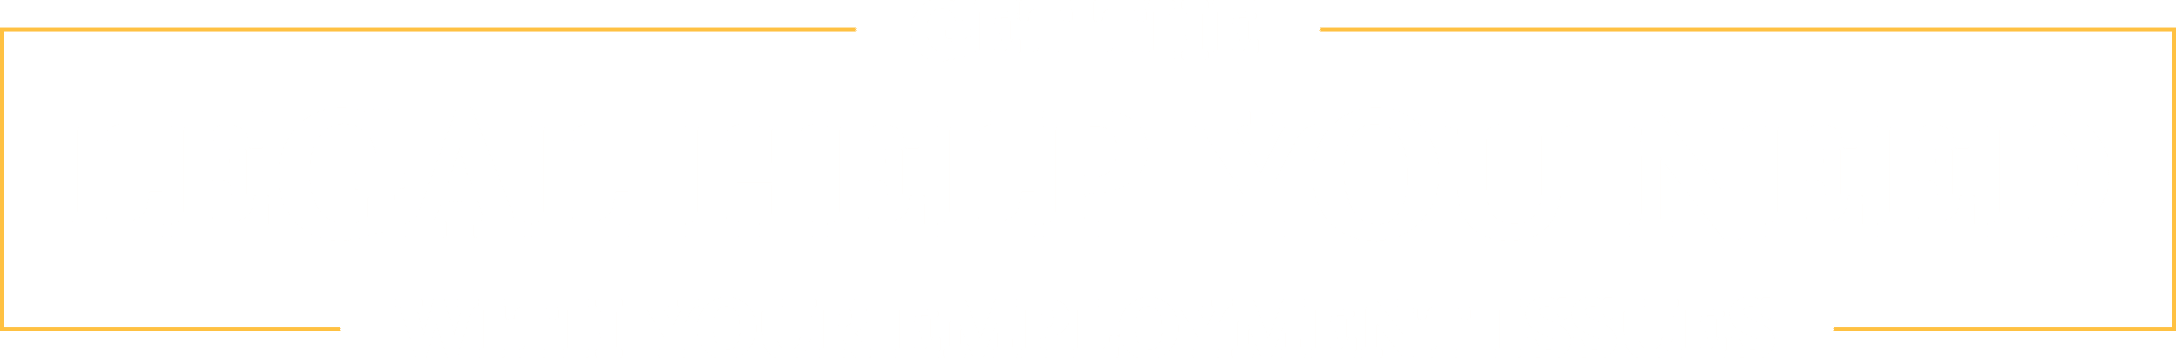 Get the legal help you need with your employment issues